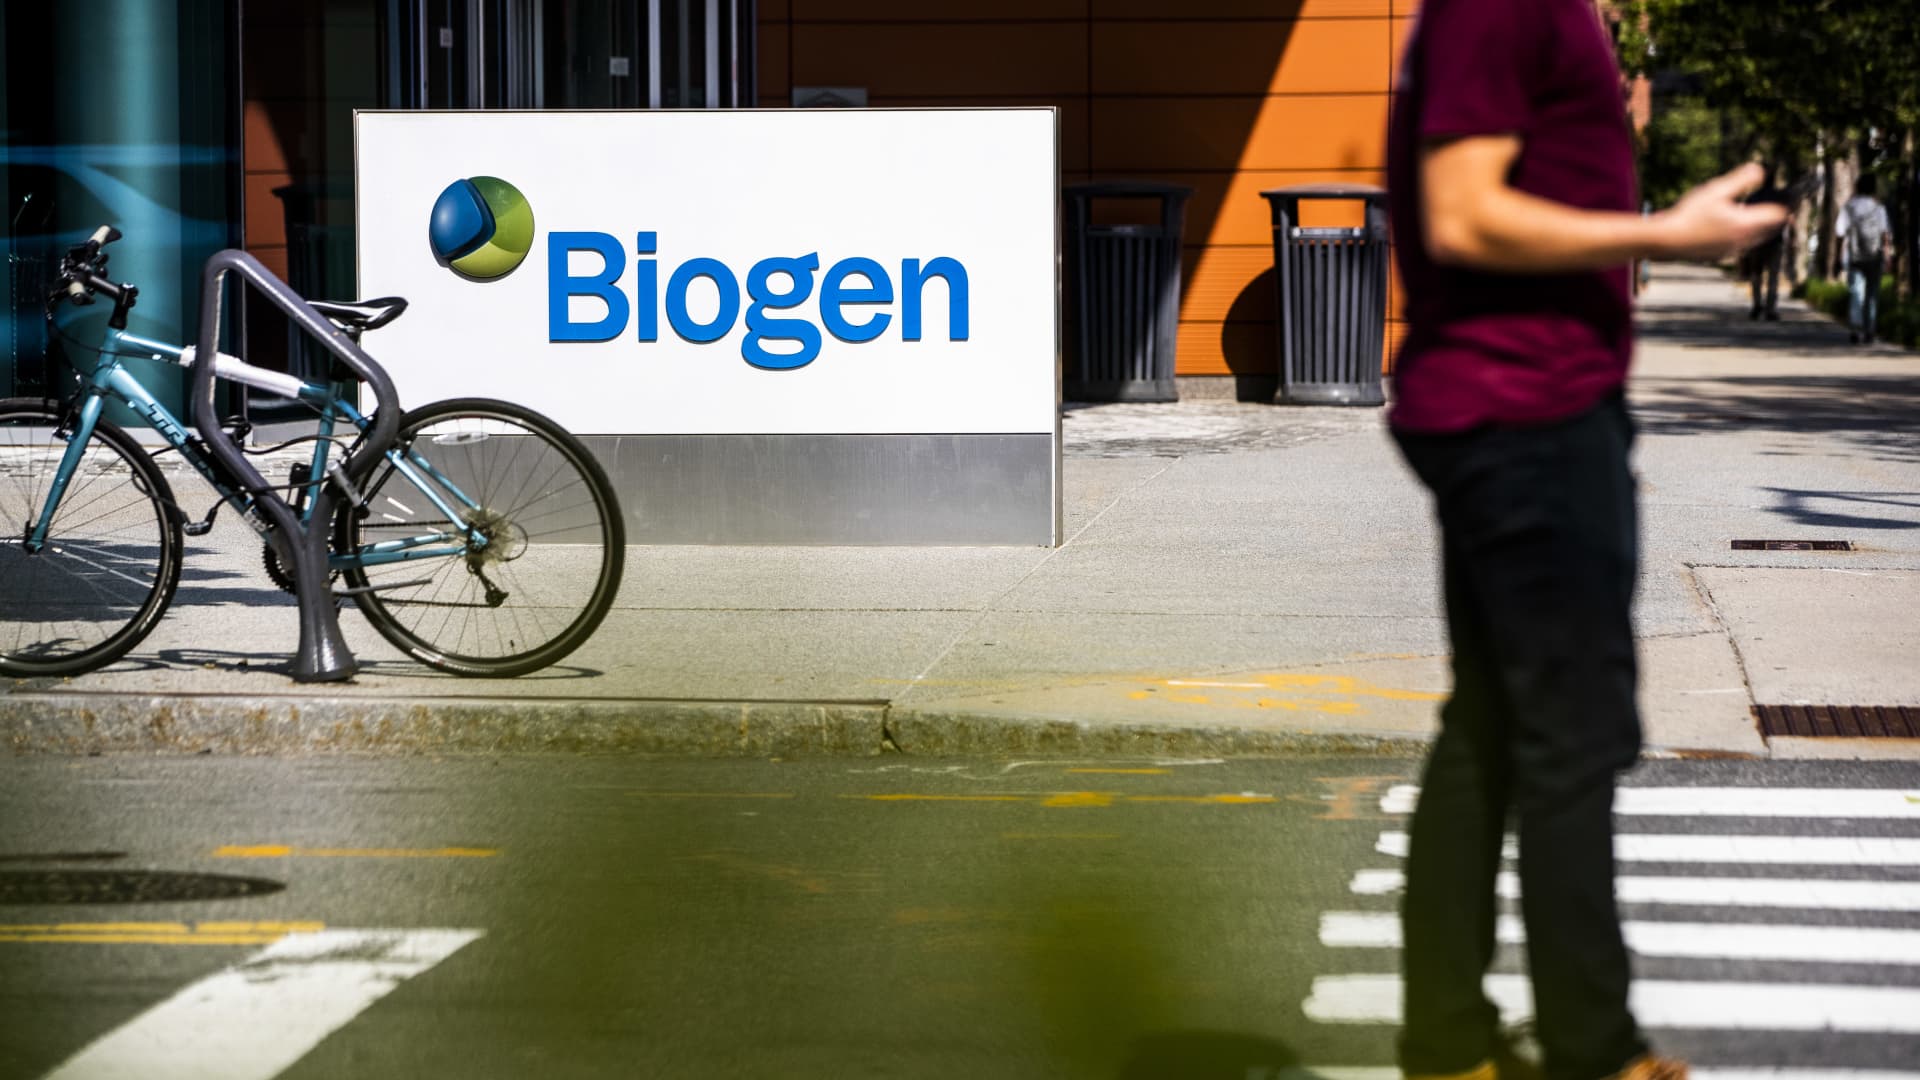 Biogen isn’t concerned about competing with Eli Lilly in the Alzheimer’s drug space, CEO says